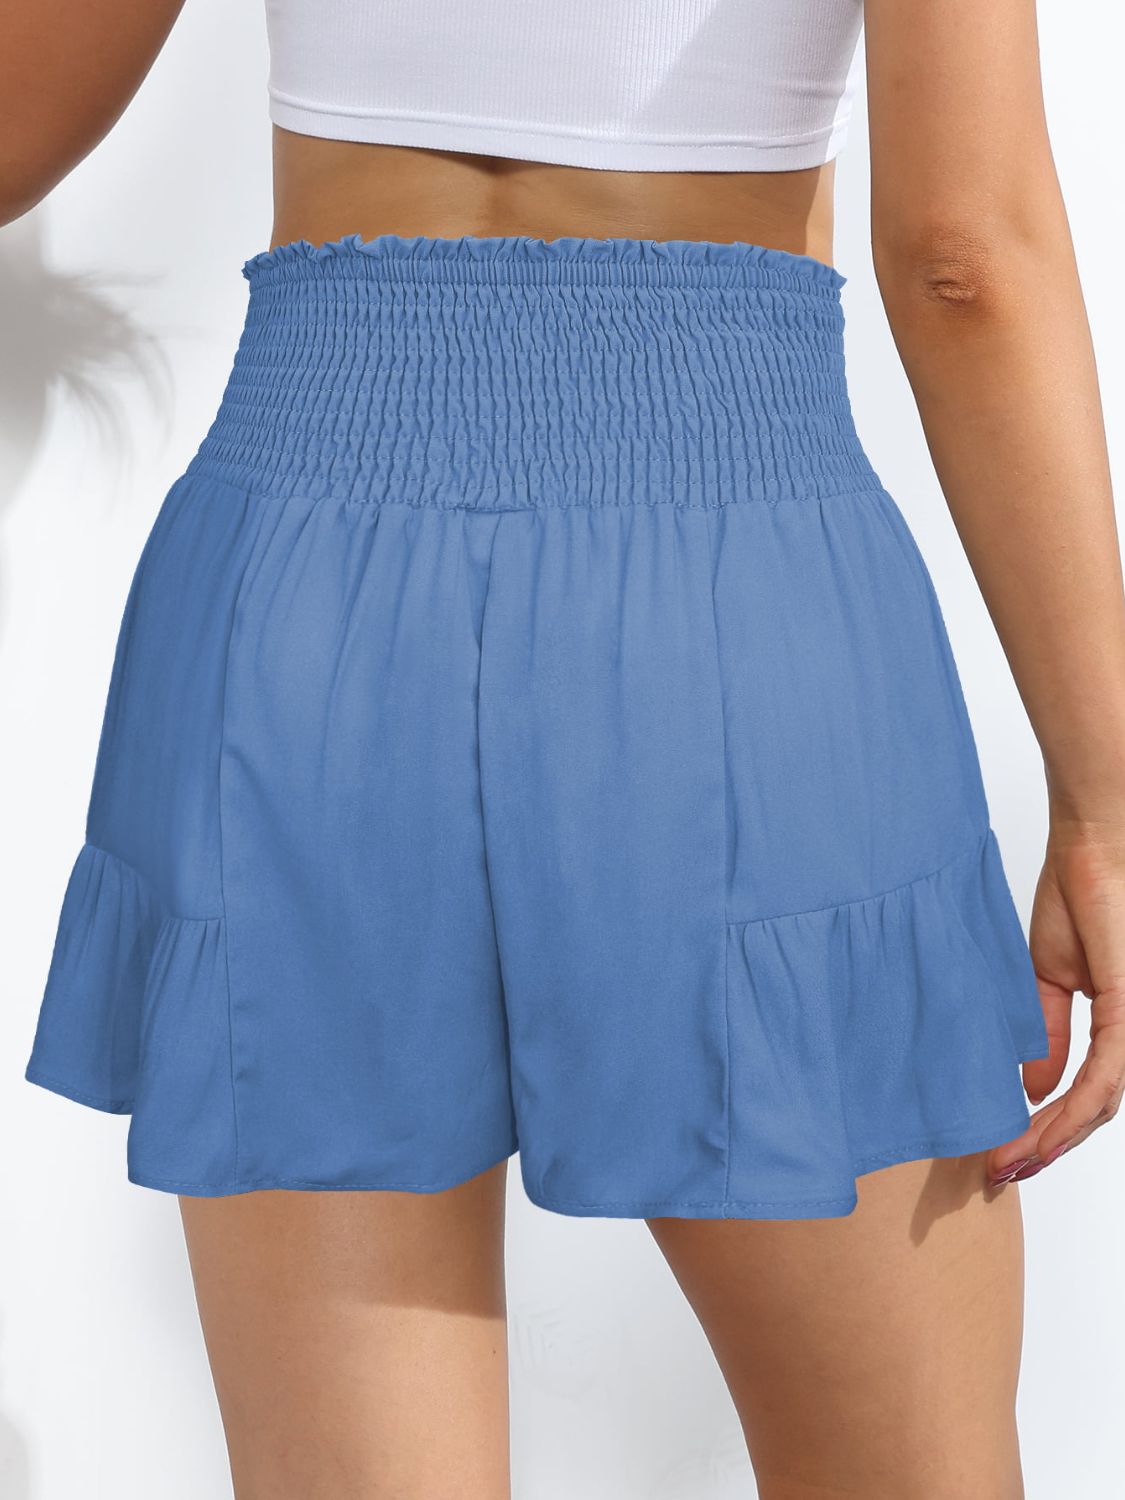 Smocked Tie-Front High-Rise Shorts - Women’s Clothing & Accessories - Shorts - 12 - 2024